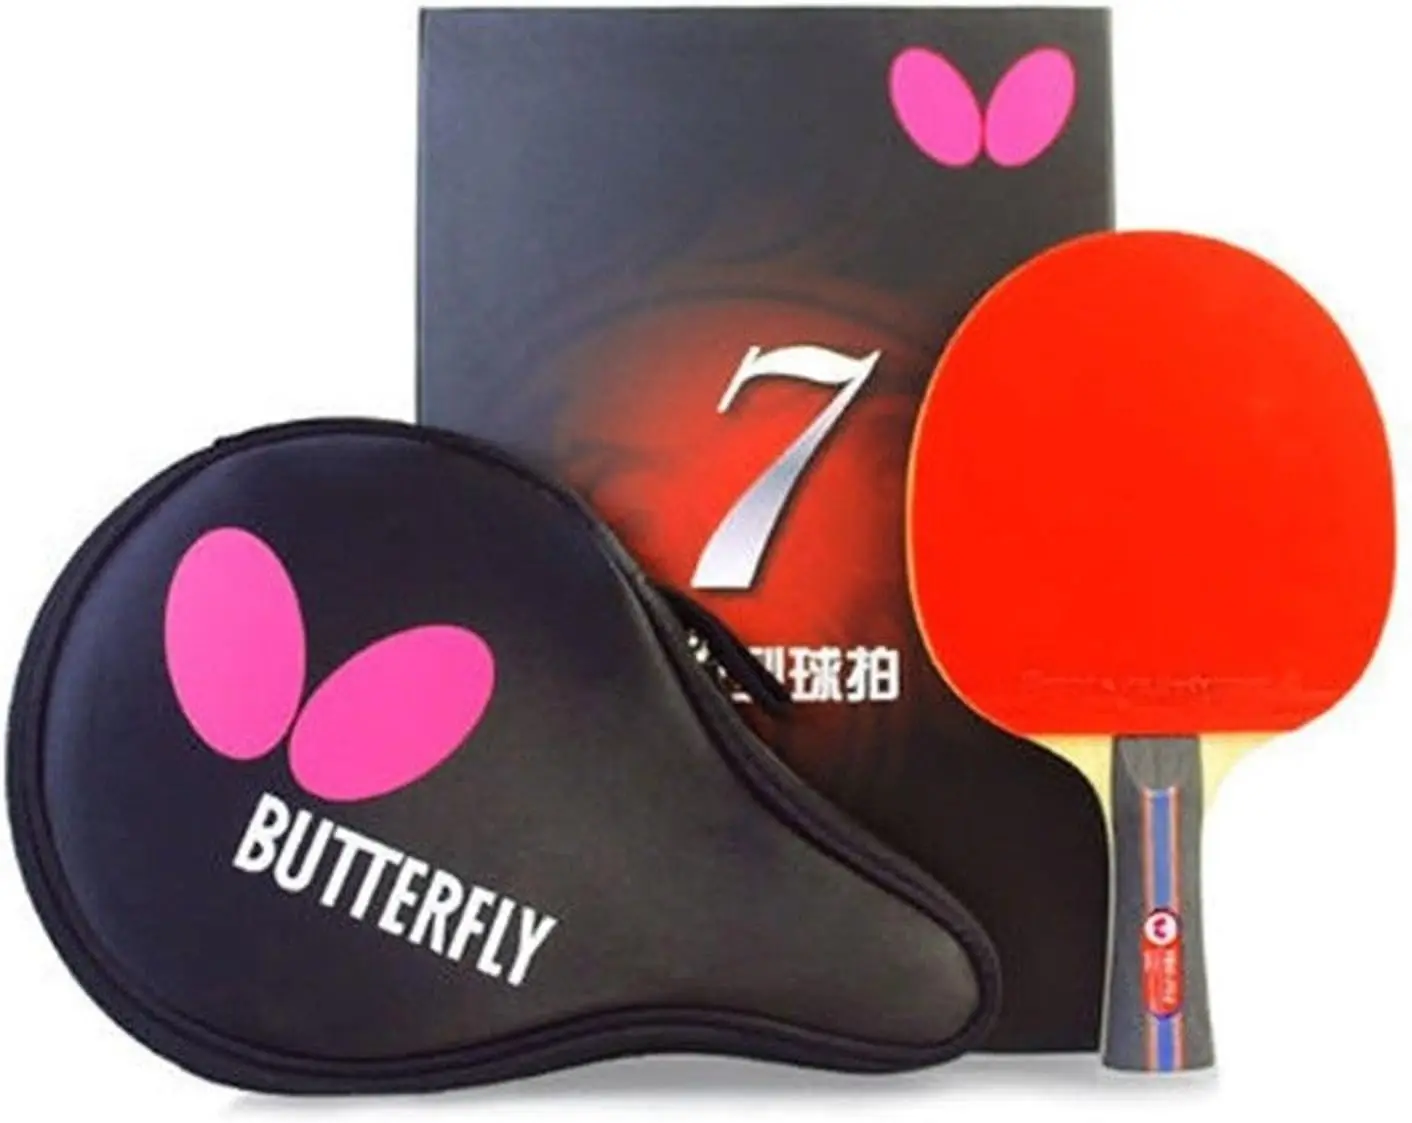 

B702FL Shakehand Table Tennis Racket | China Series | Powerful Carbon Blade and Rubber Combination with Racket Case | Recommende